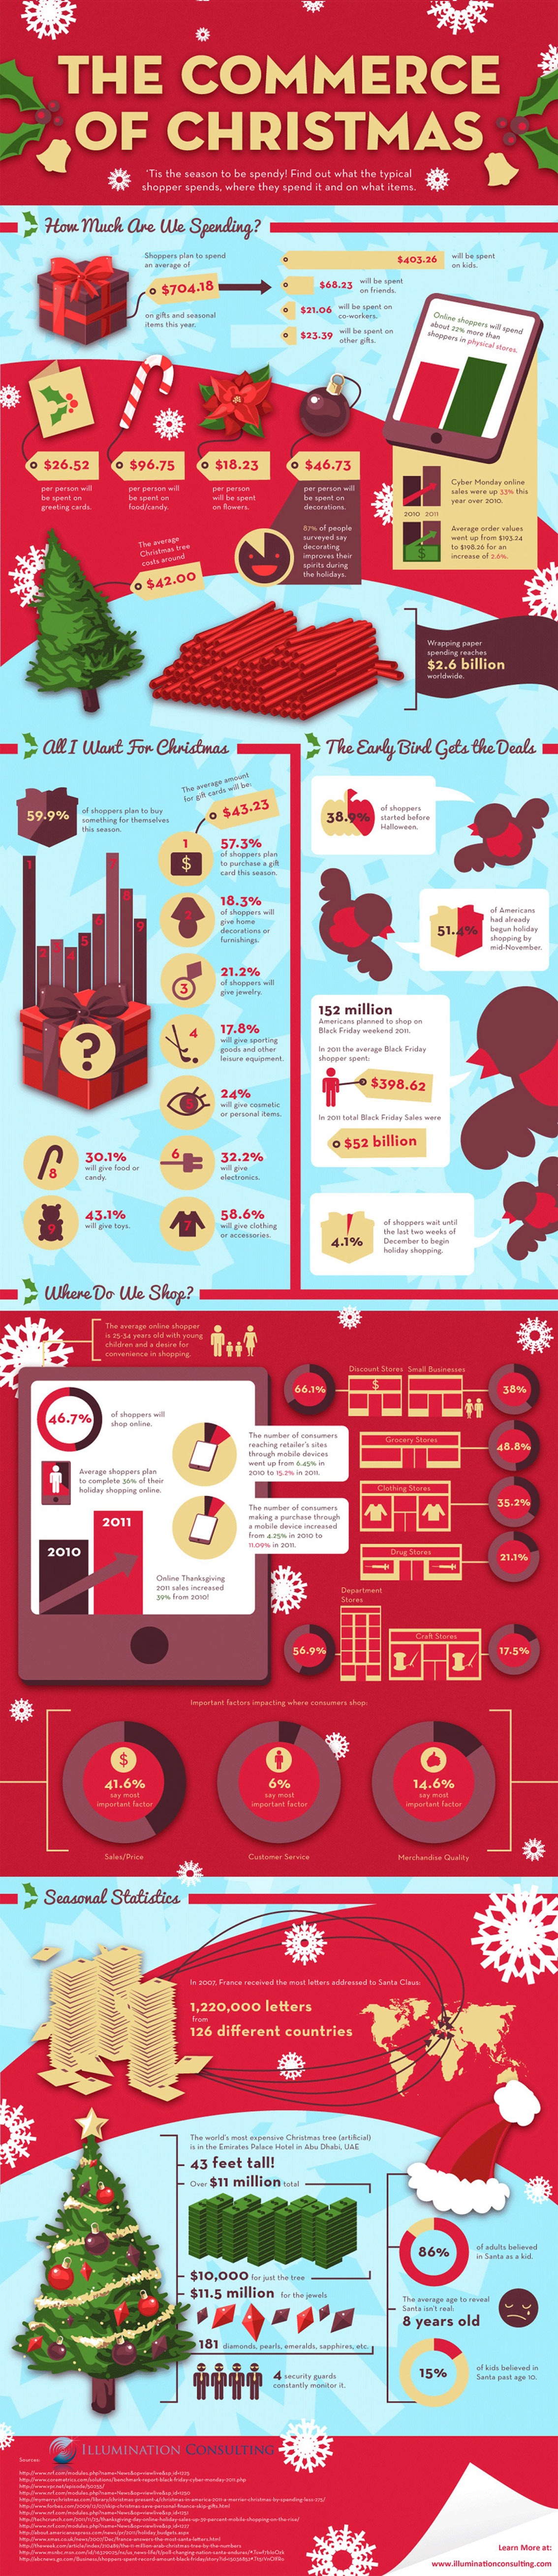 Business of Christmas Infographic